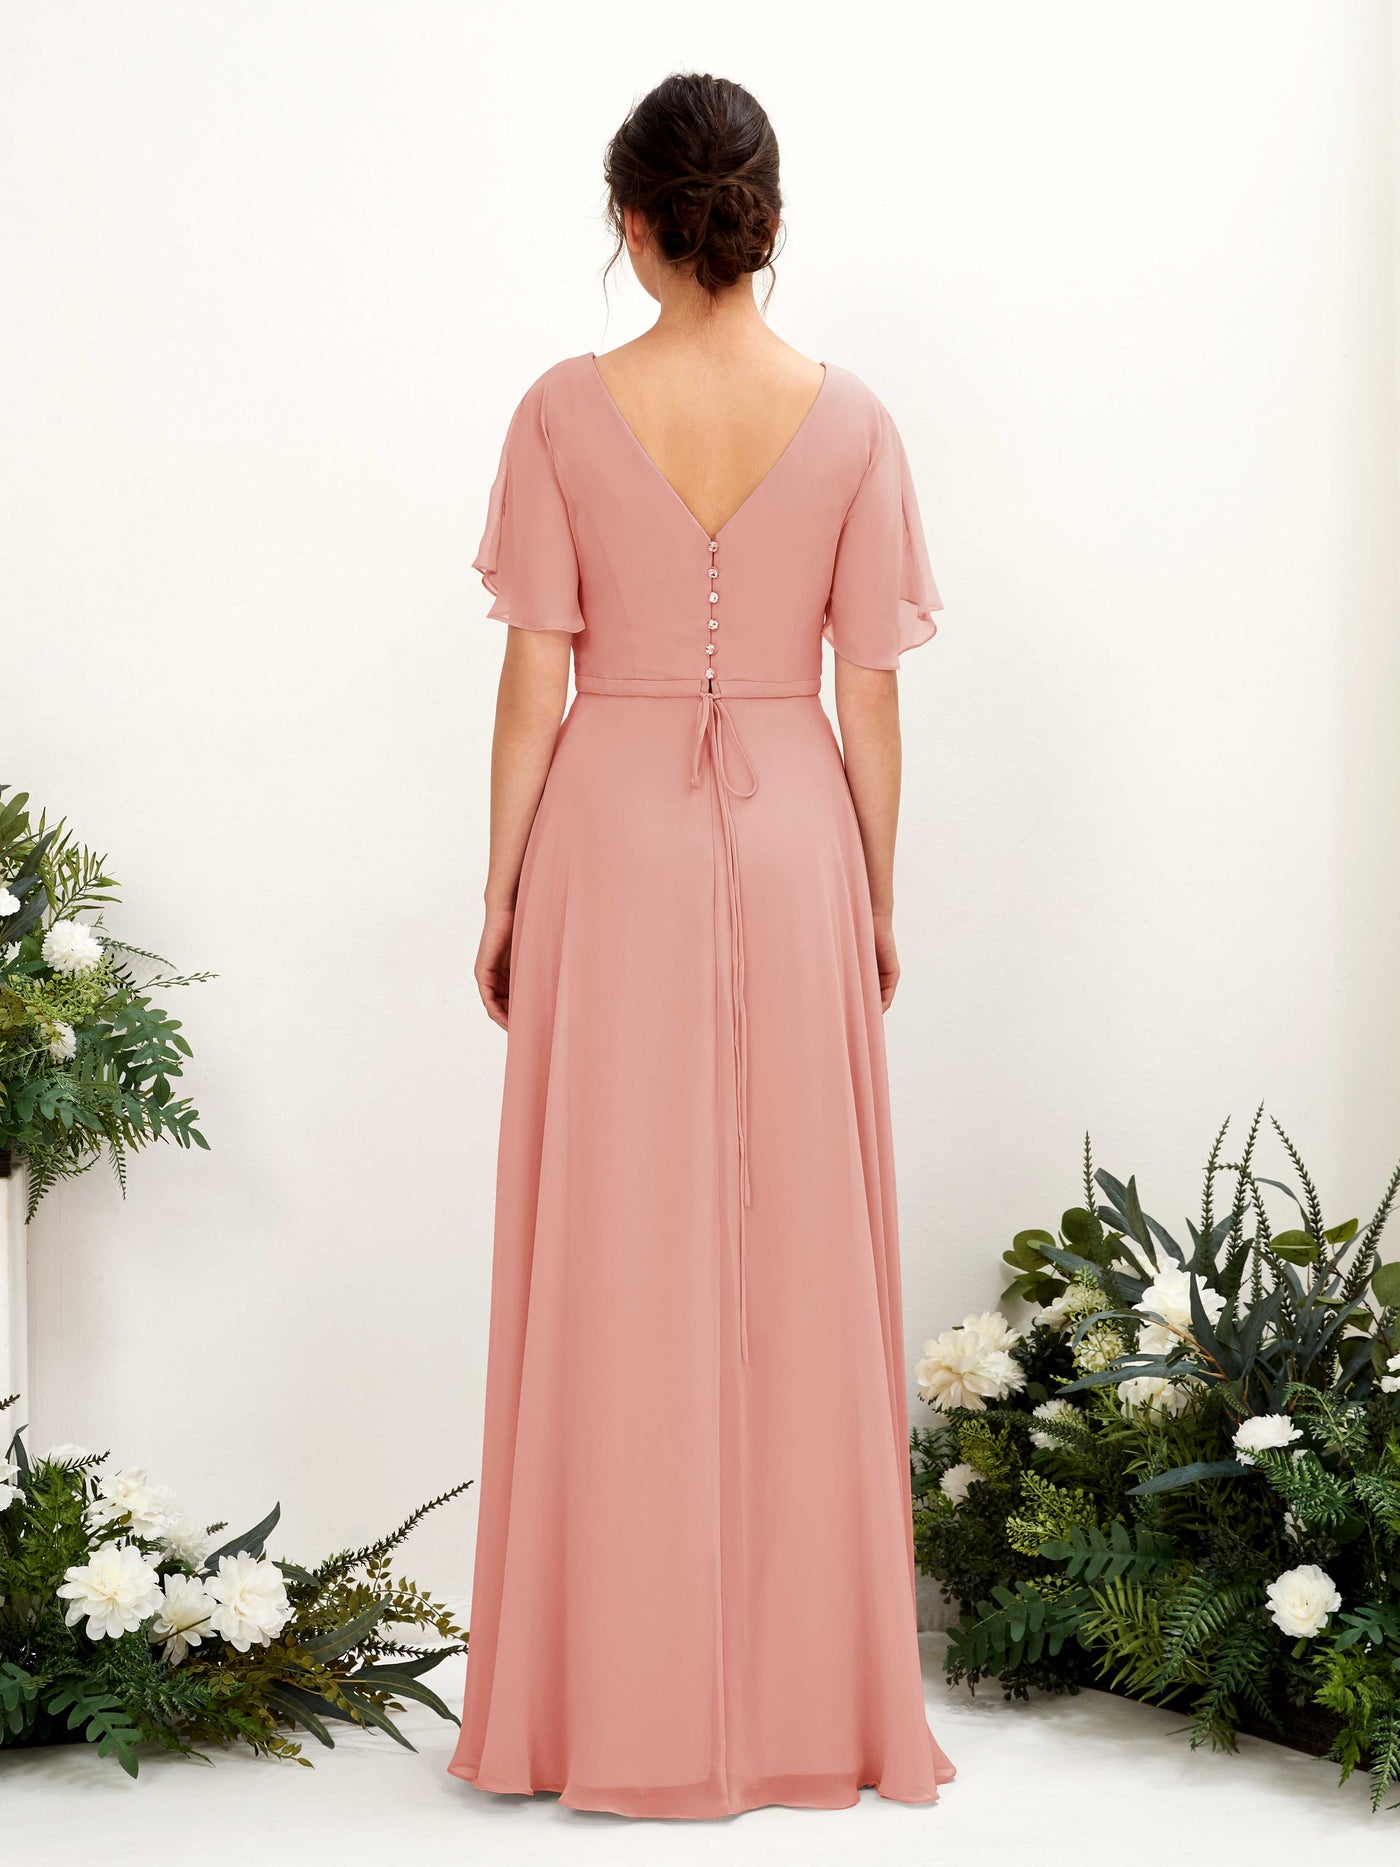 Champagne Rose Bridesmaid Dresses Bridesmaid Dress A-line Chiffon V-neck Full Length Short Sleeves Wedding Party Dress (81224606)#color_champagne-rose